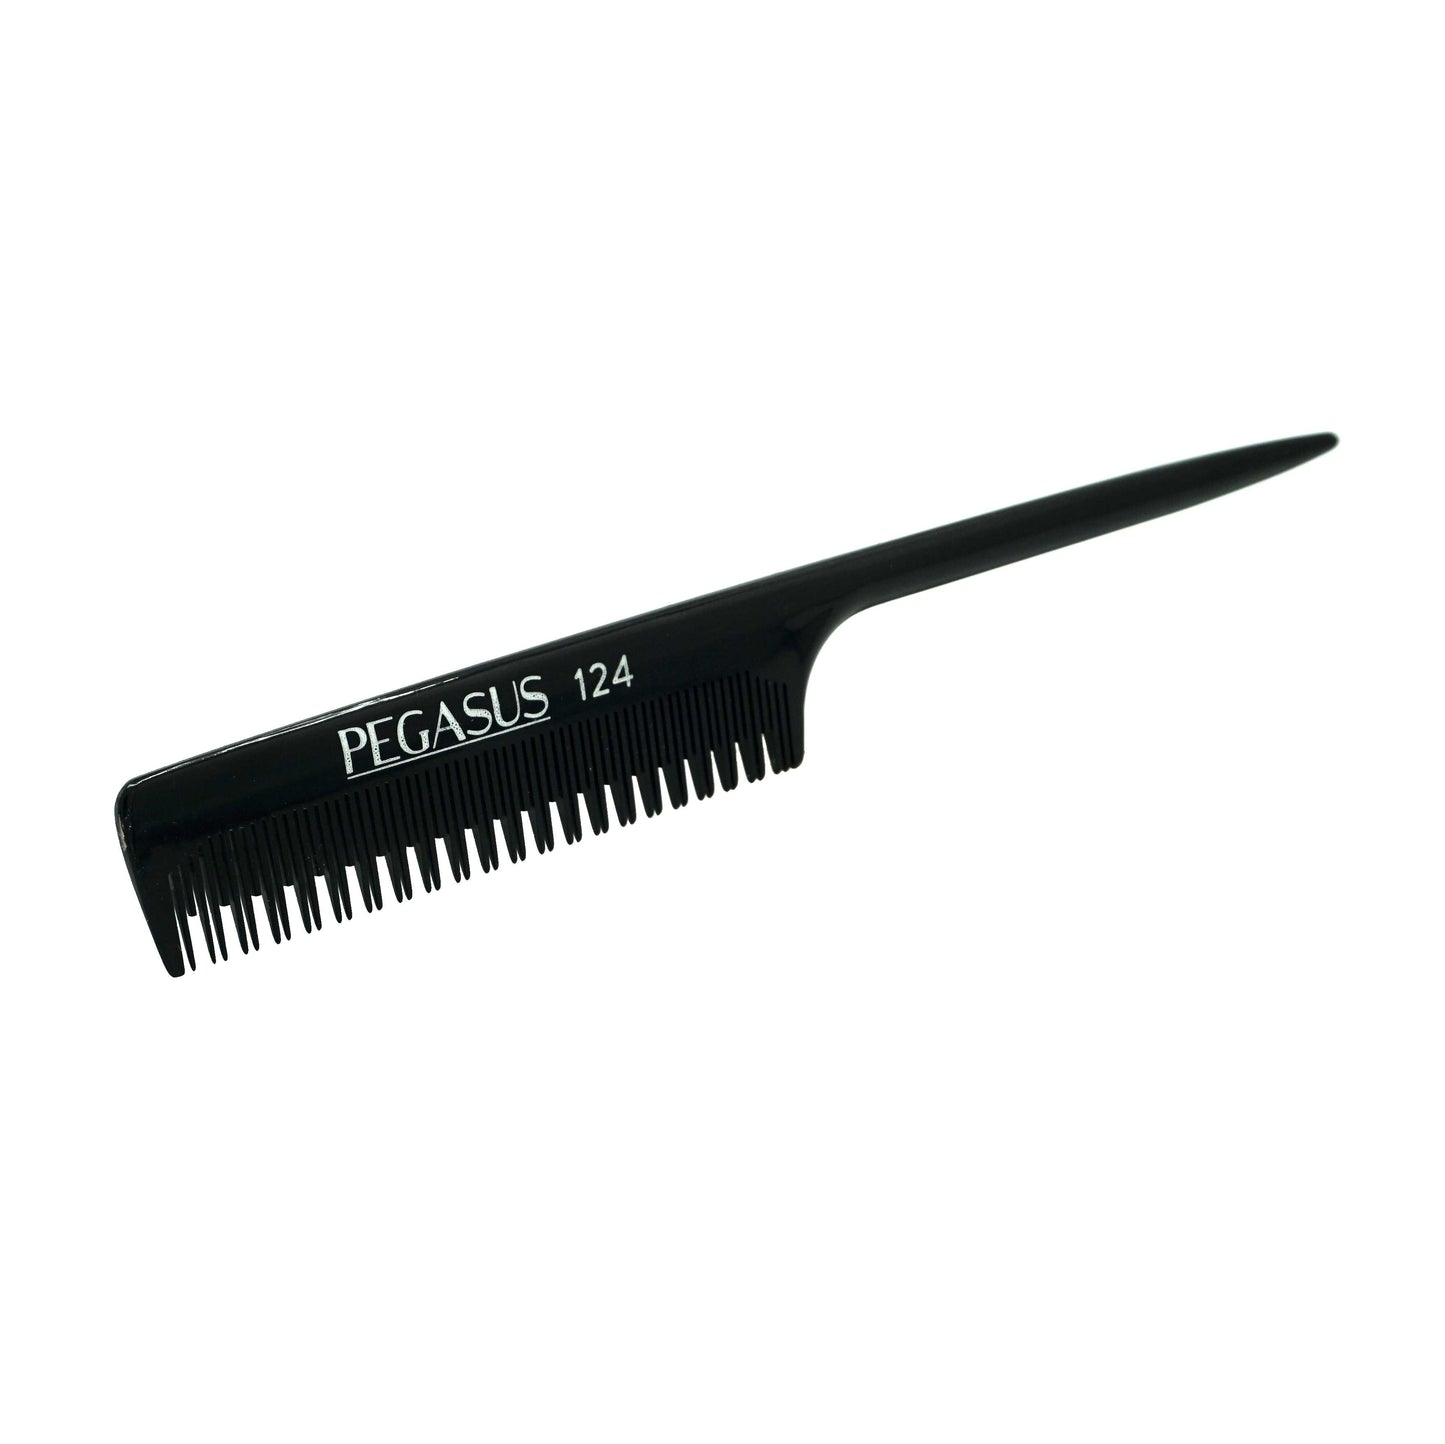 Pegasus 124, 8in Hard Rubber Rat Tail Tease Comb, Handmade, Seamless, Smooth Edges, Anti Static, Heat and Chemically Resistant, Great for Parting, Coloring Hair | Peines de goma dura - Black